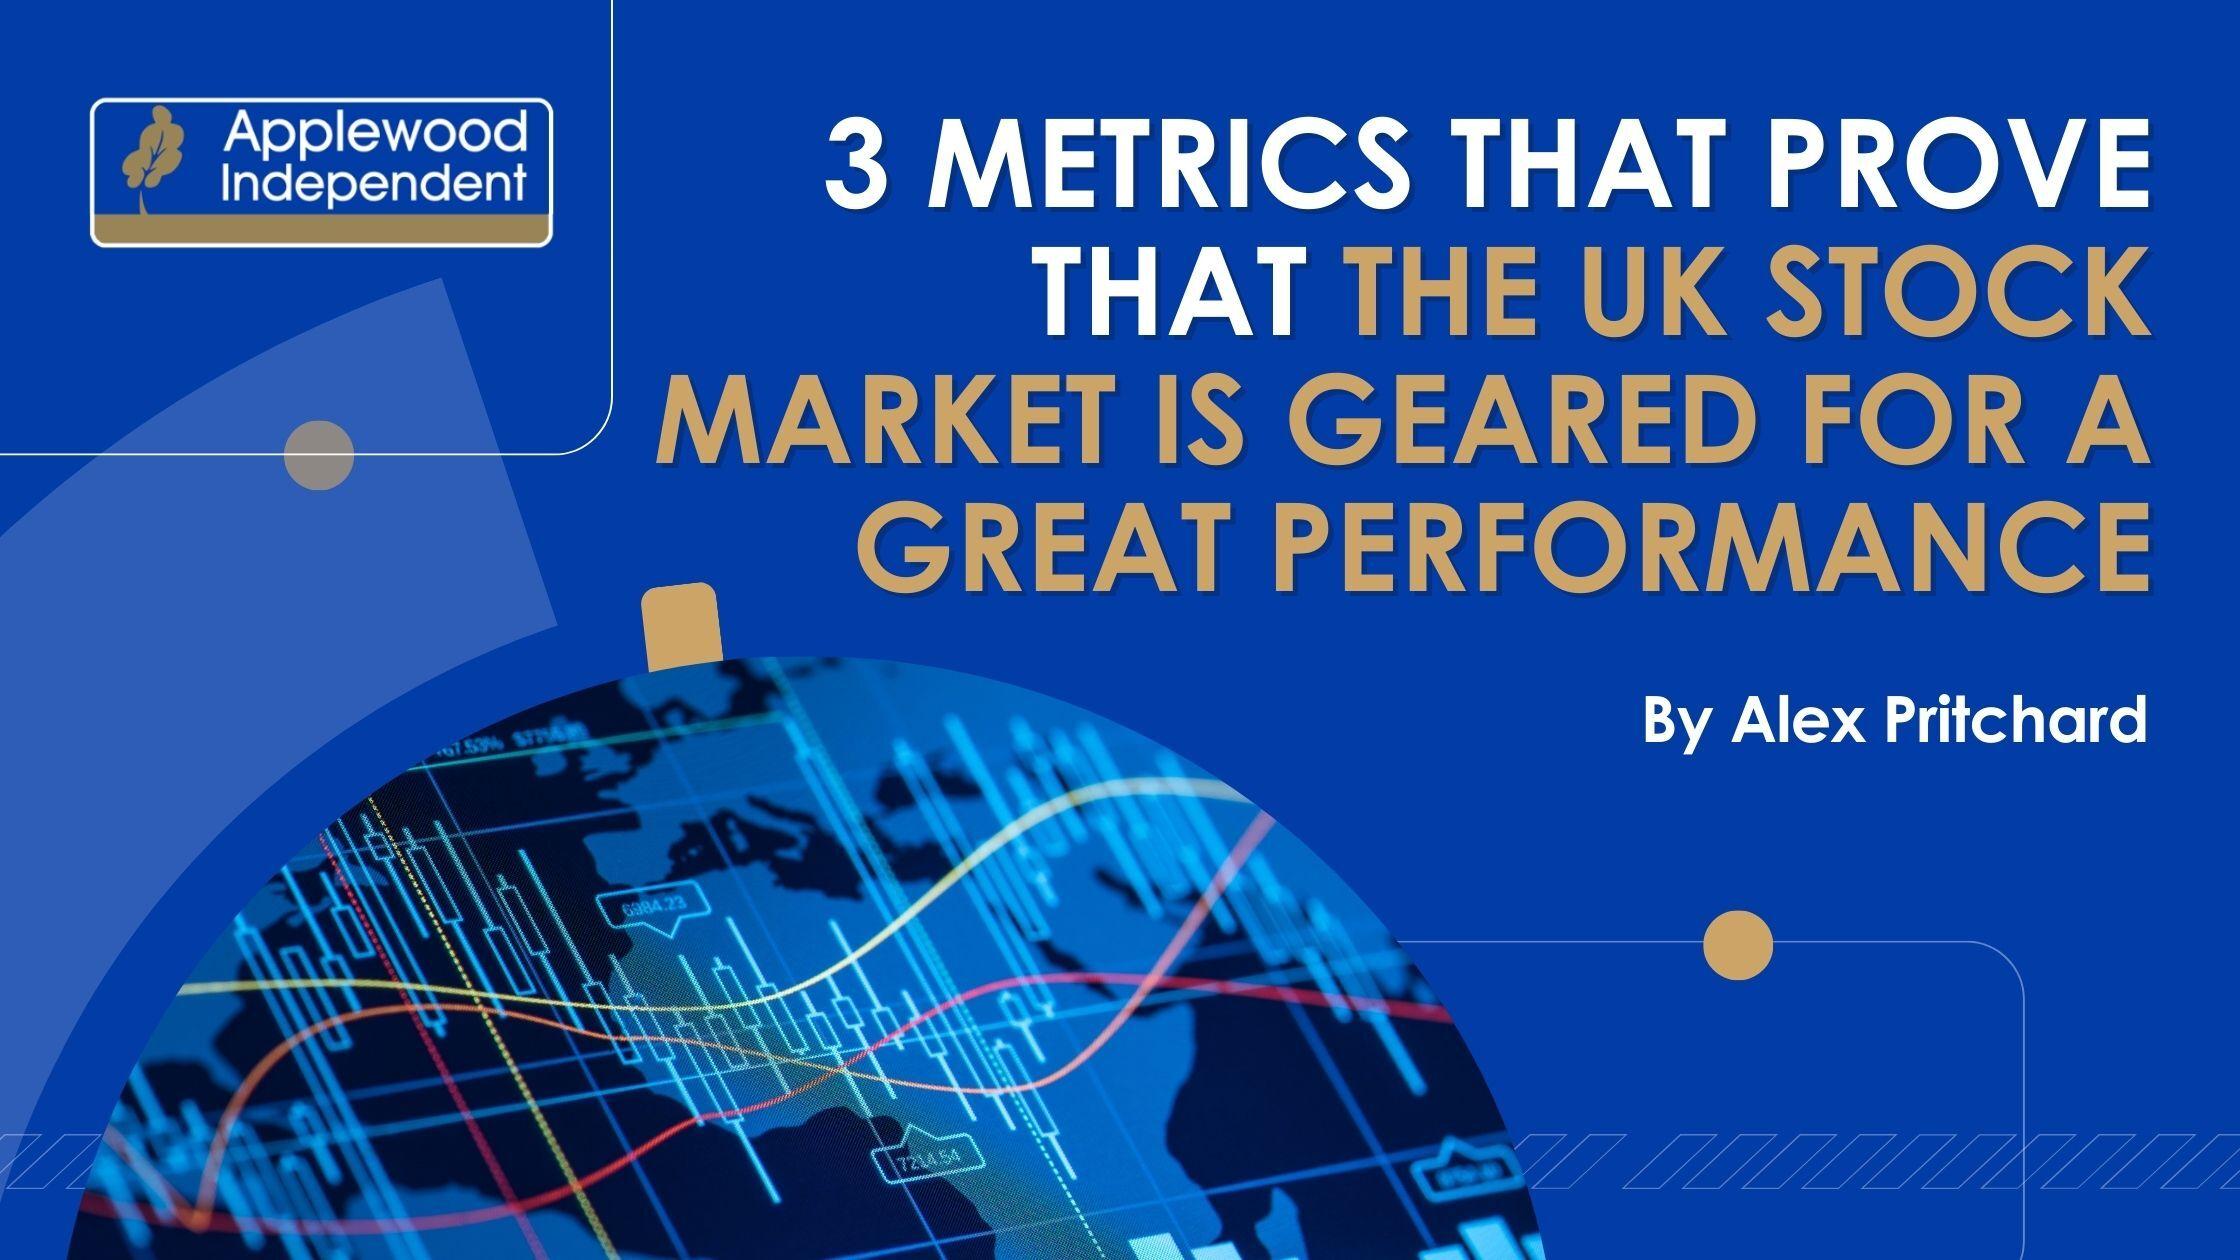 3 Metrics That Prove That The UK Stock Market Is Geared For A Great Performance